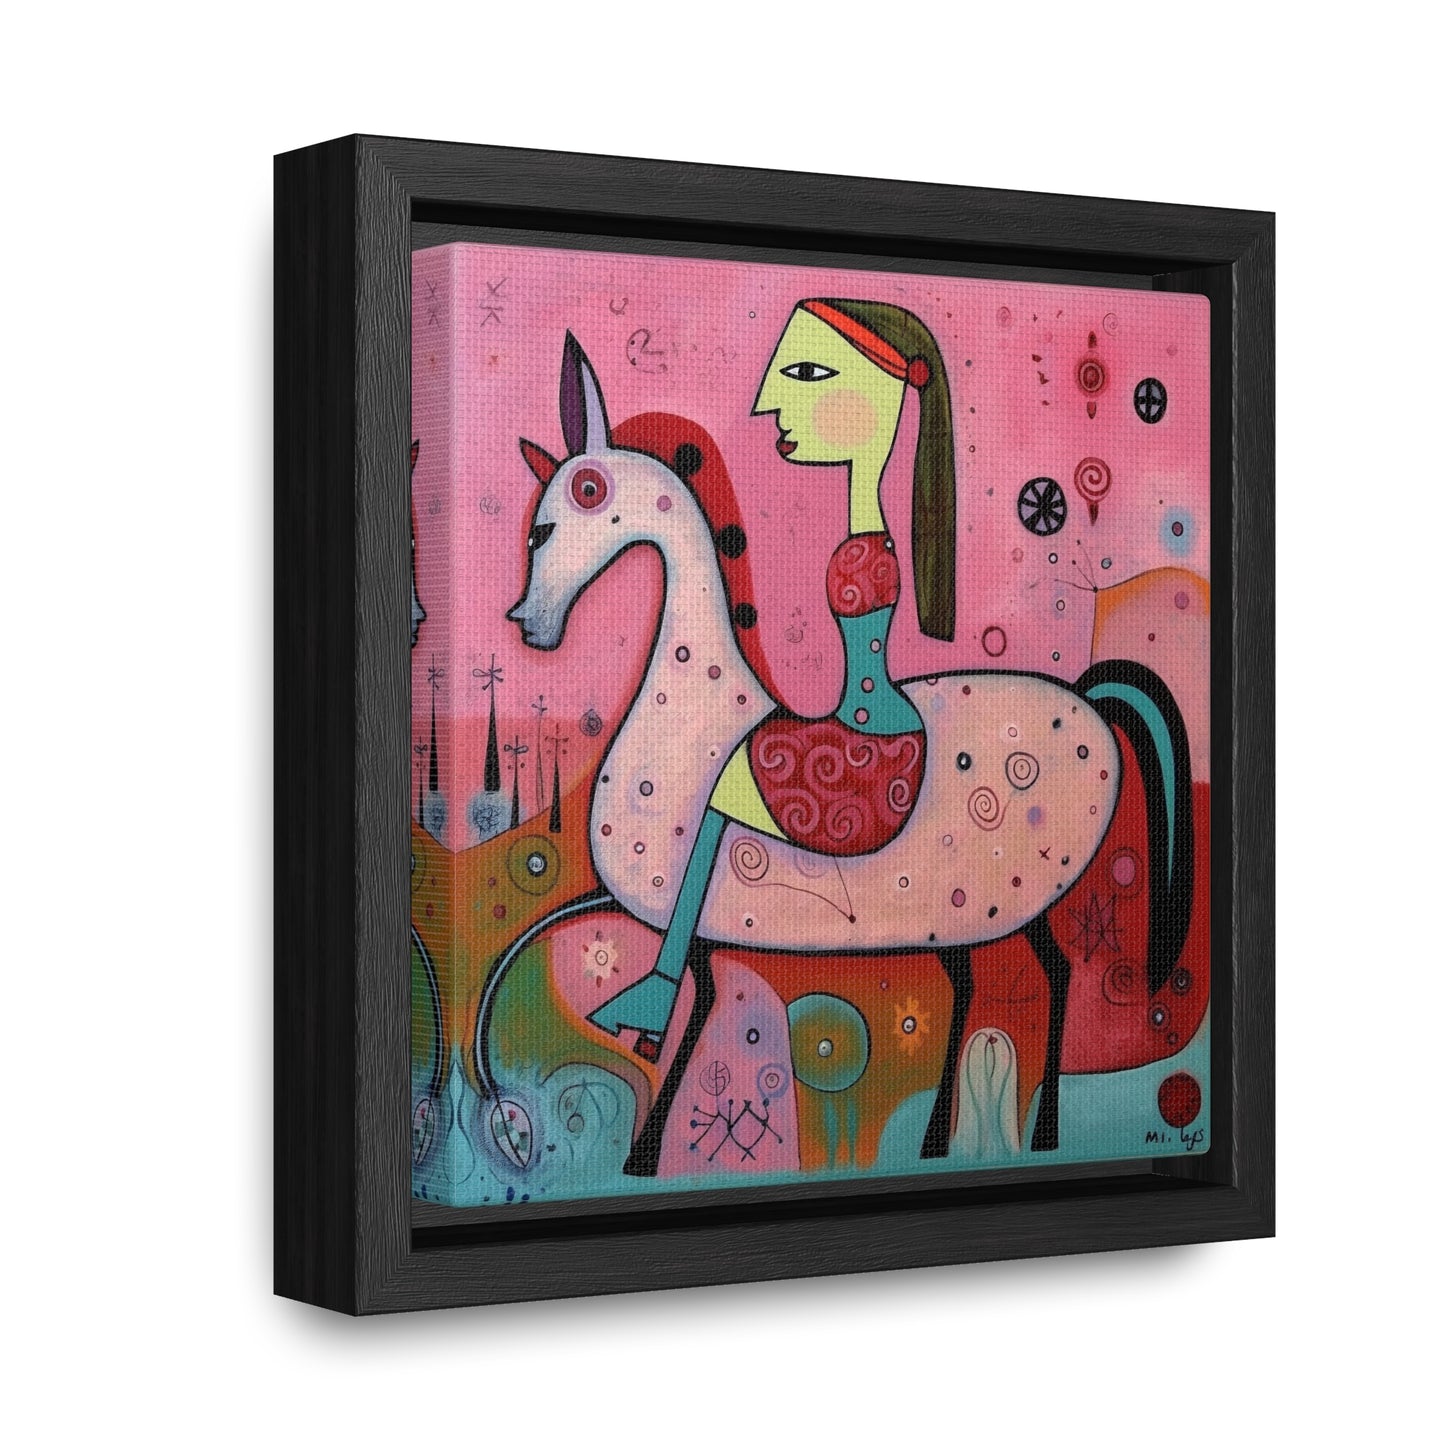 The Dreams of the Child 51, Gallery Canvas Wraps, Square Frame